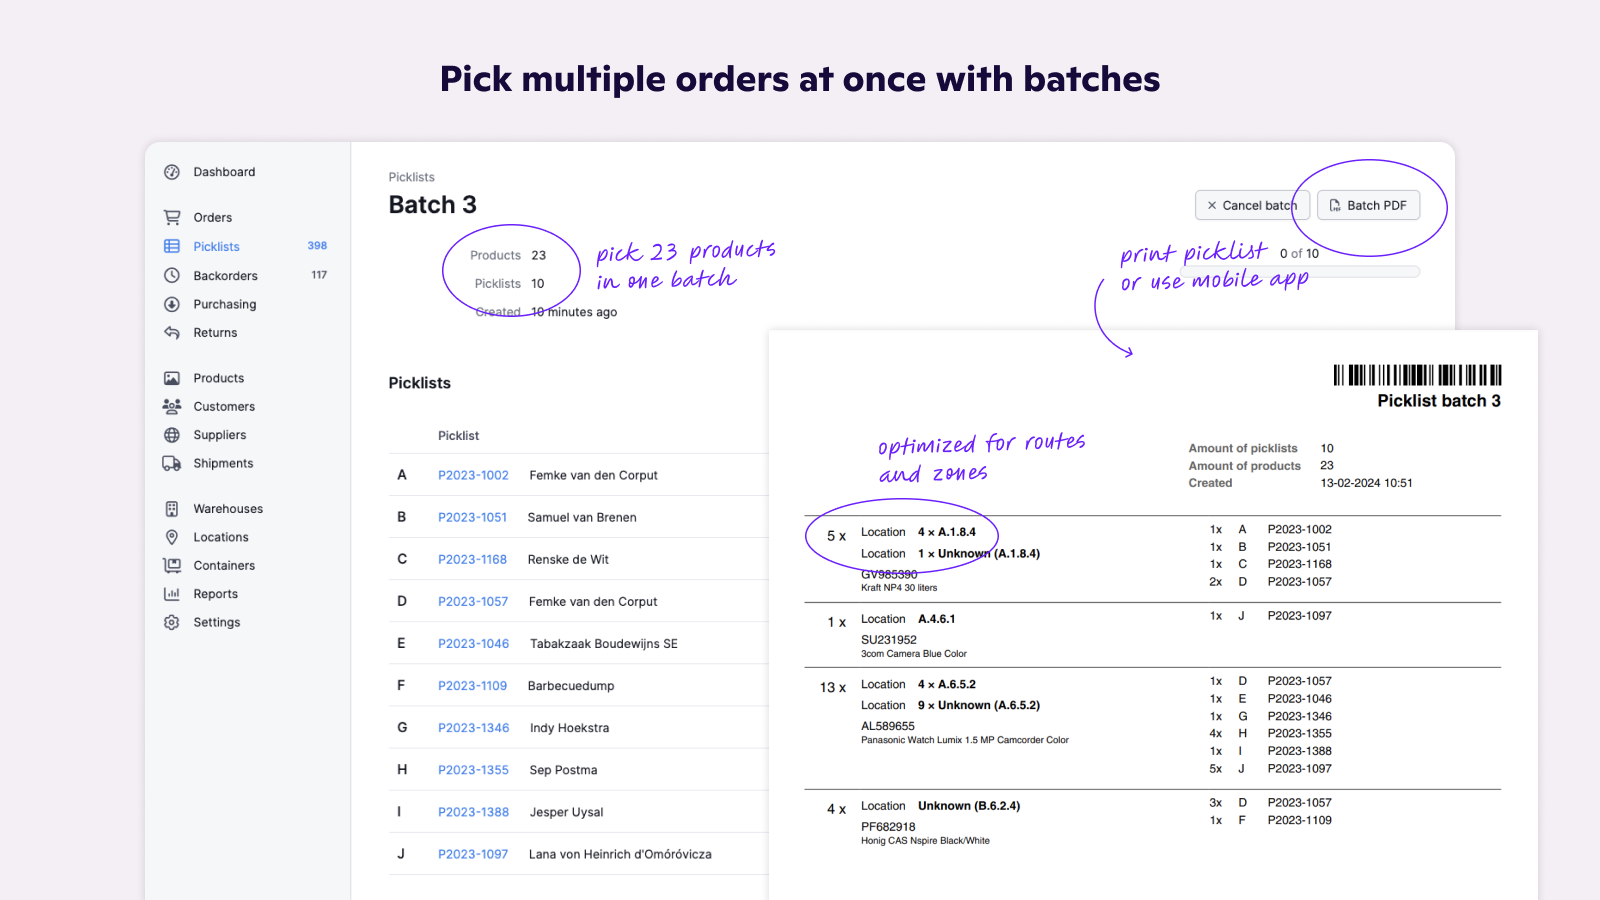 Pick multiple orders at once with batches